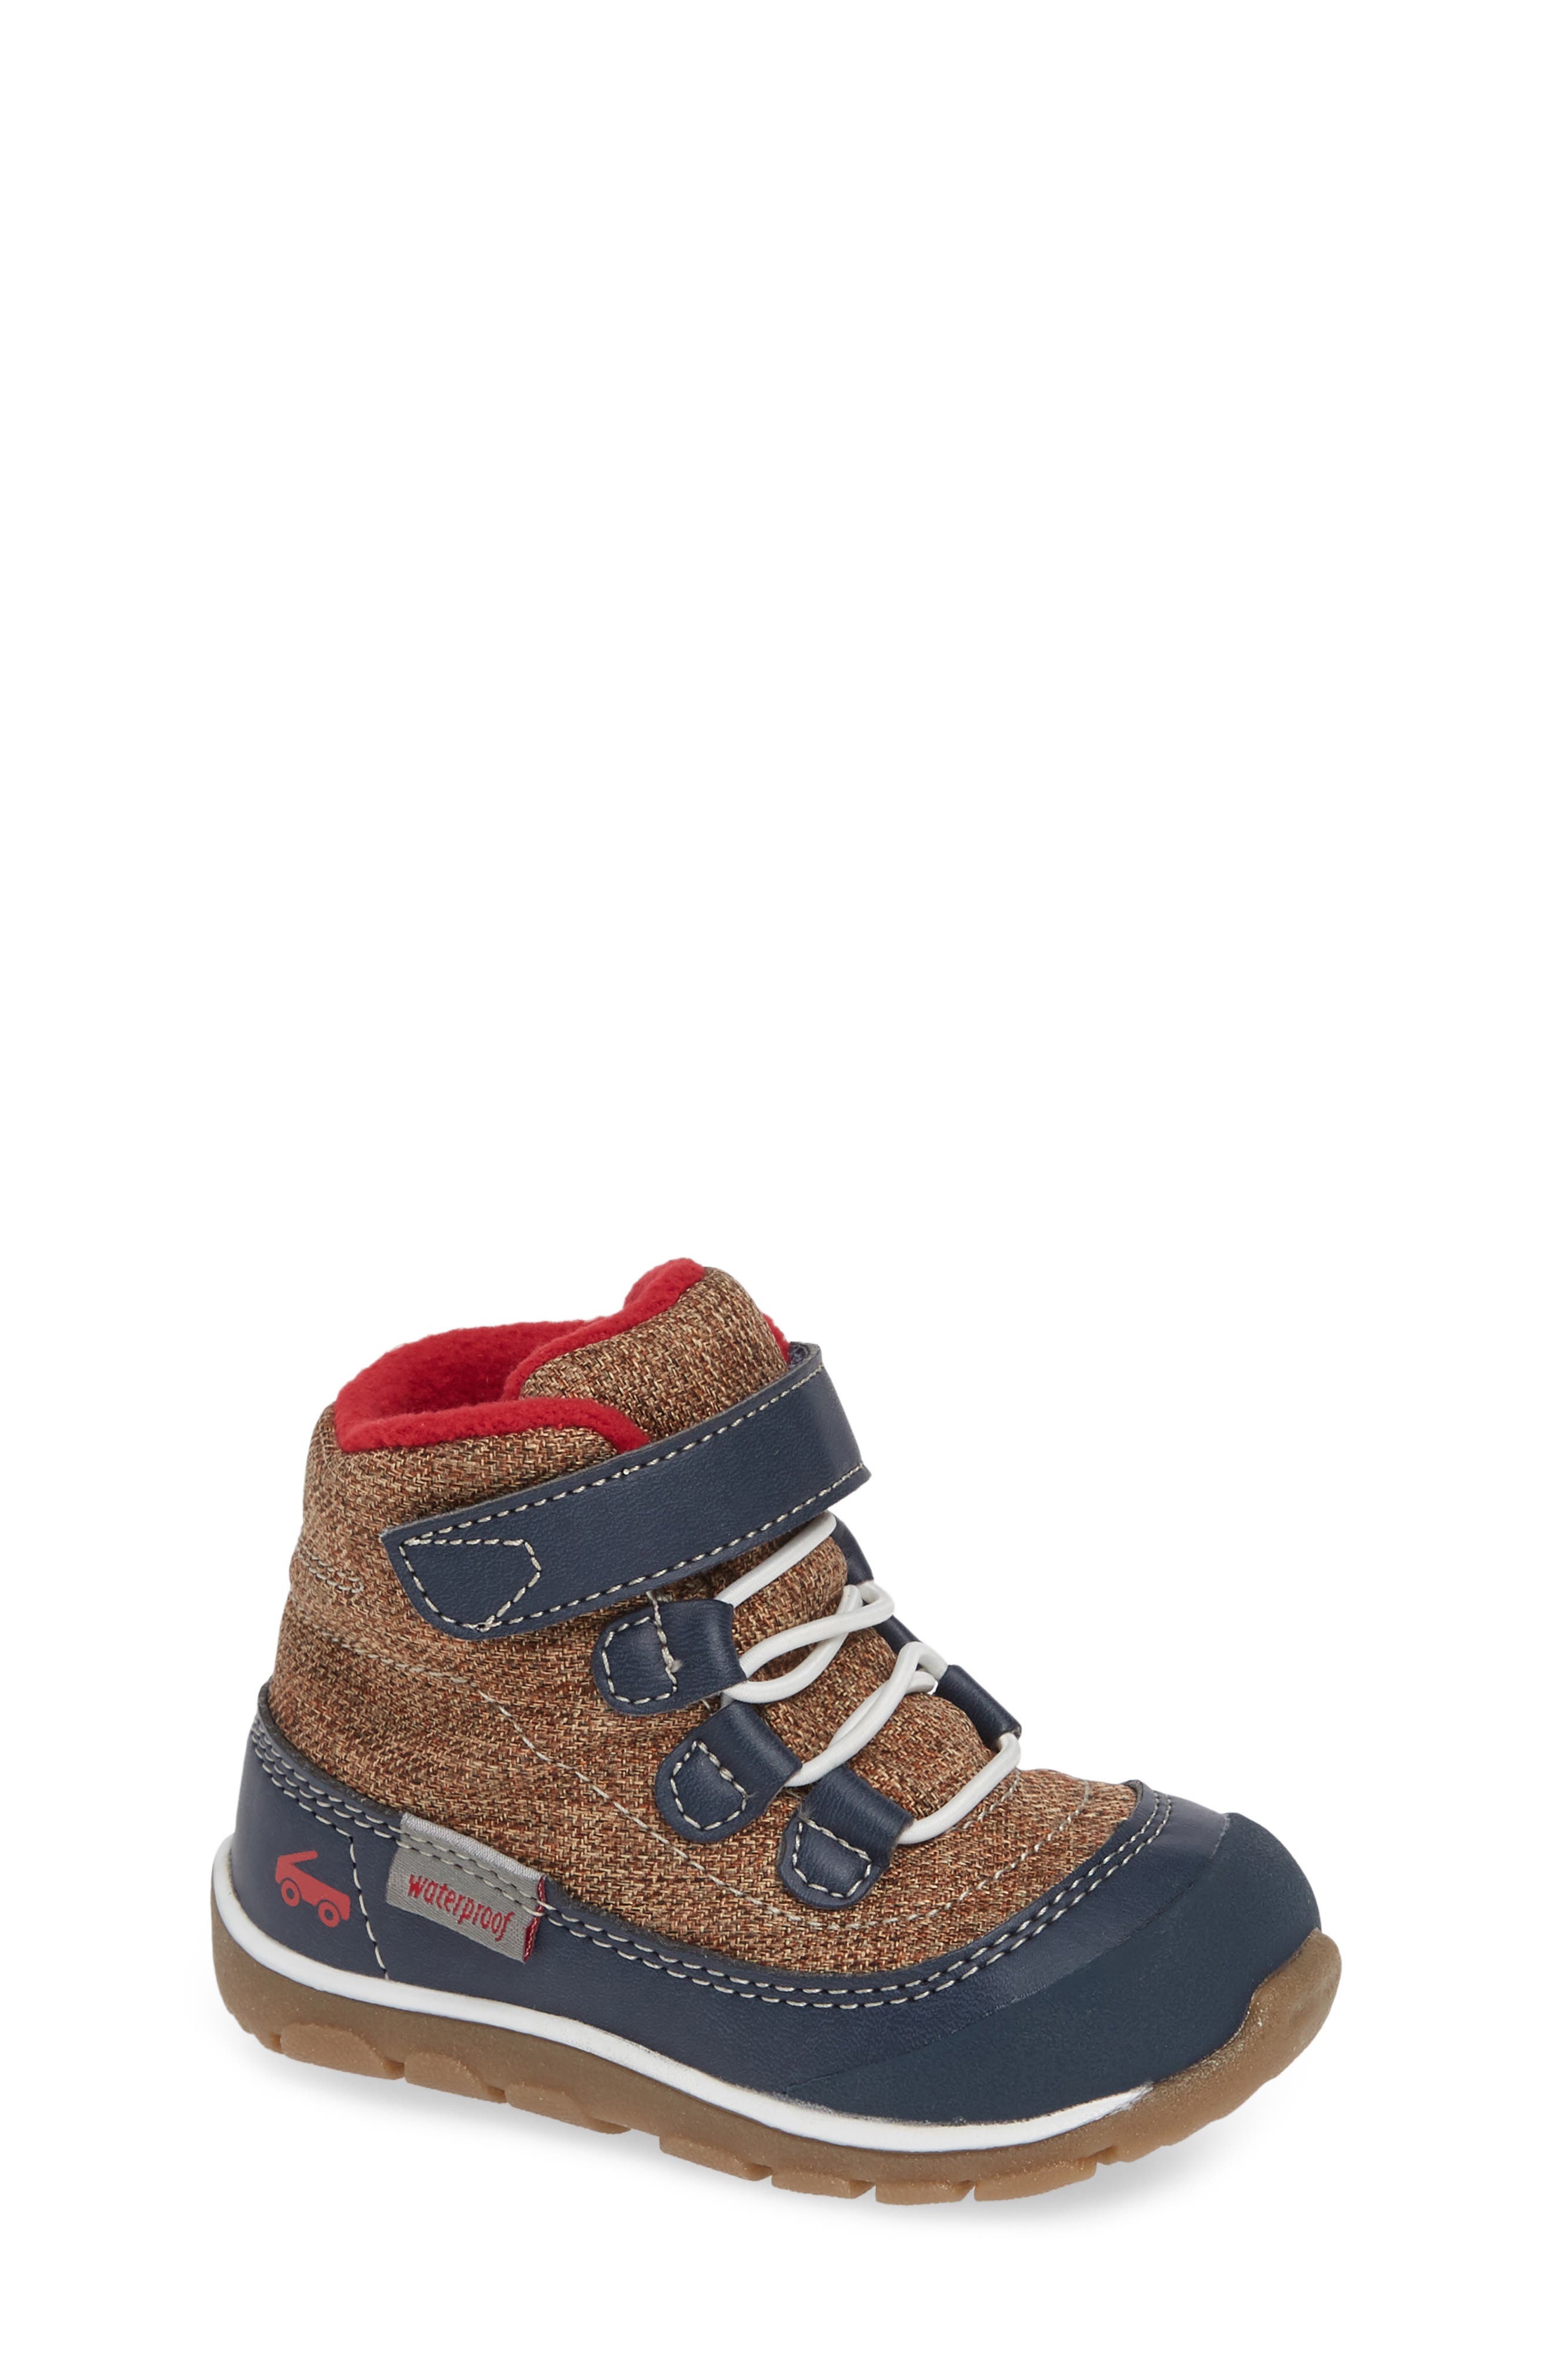 Toddler Boys Navy & Tan Faux Fur Lace Up Boots 3 7 4 